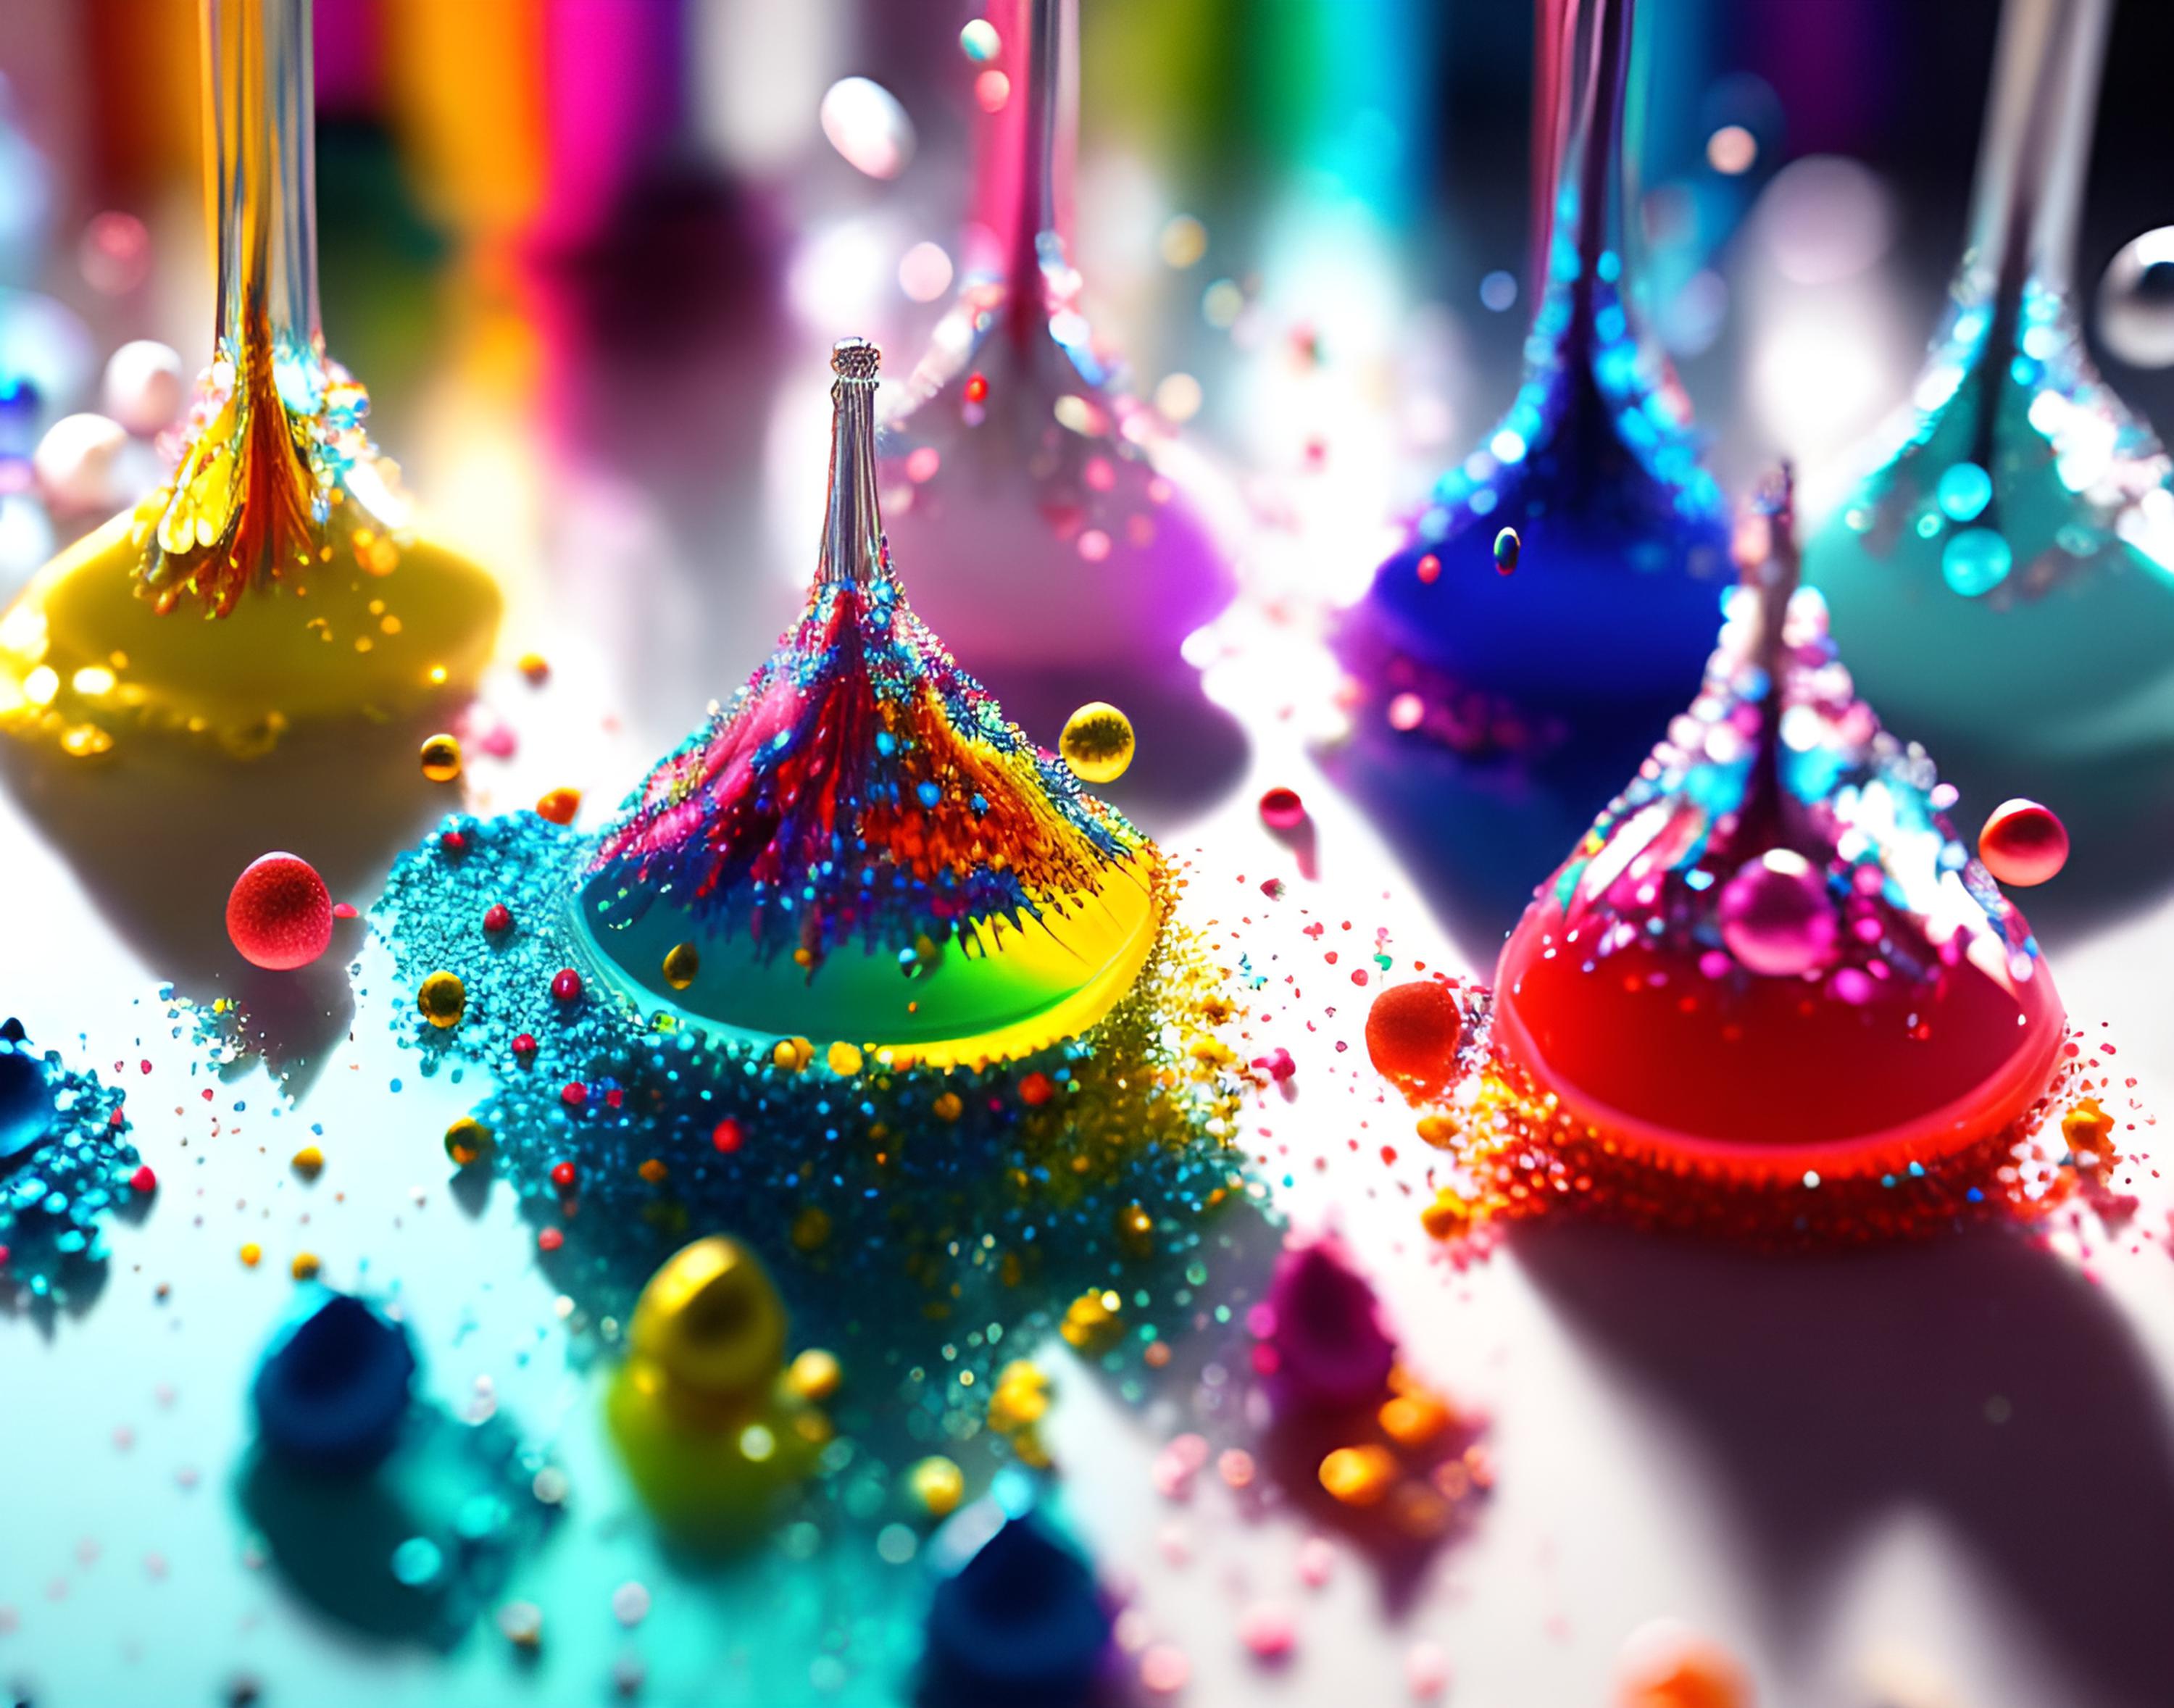 Free photo Glass figures with colorful falling drops of paint